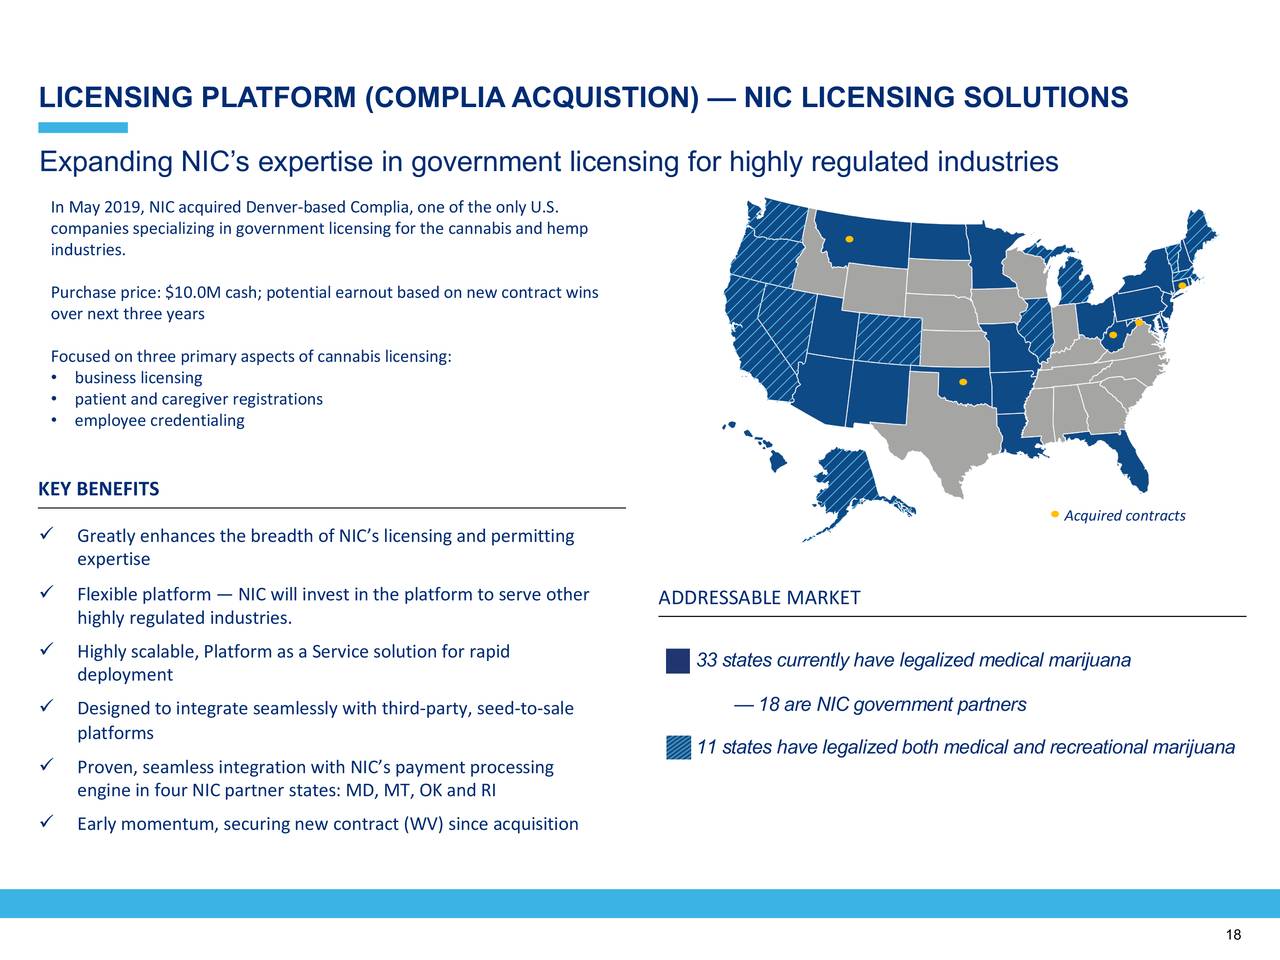 LICENSING PLATFORM (COMPLIA ACQUISTION) — NIC LICENSING SOLUTIONS